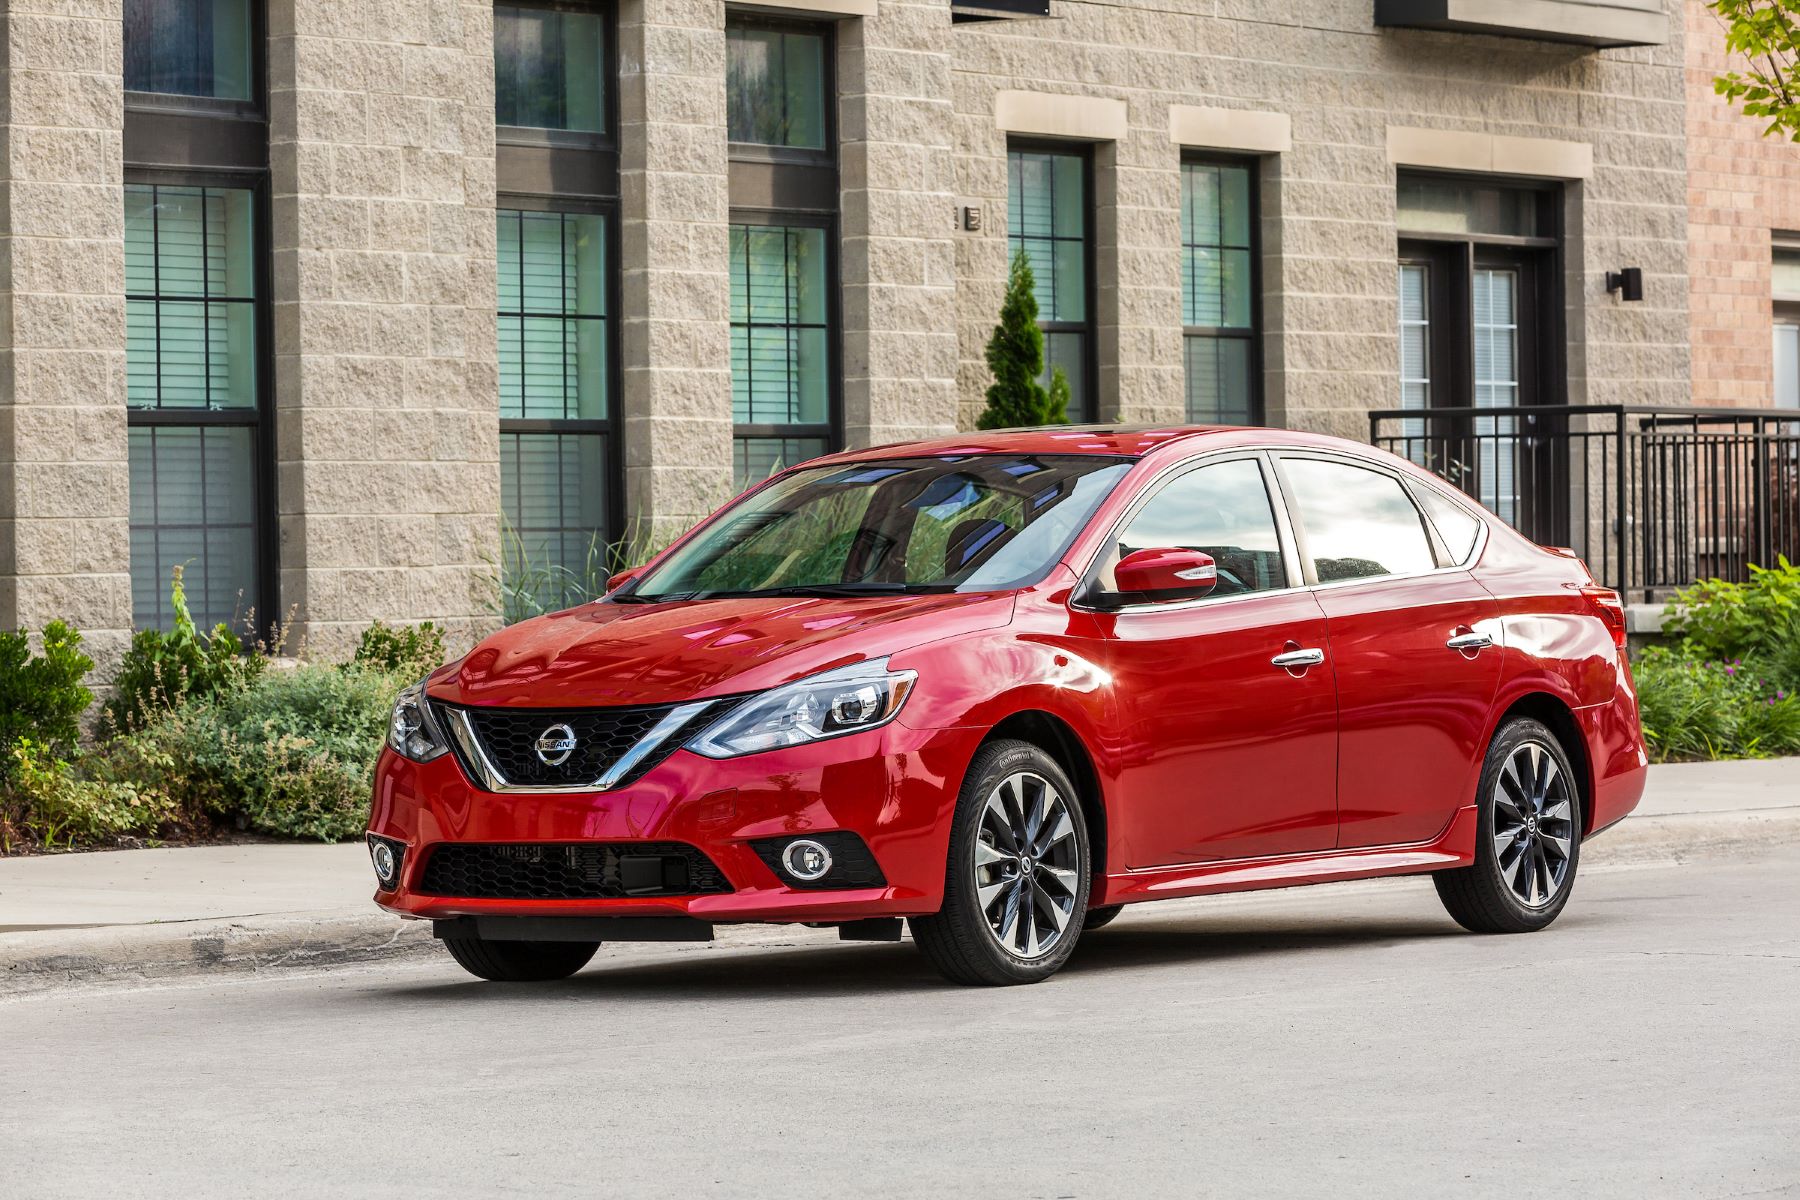 A red 2019 Nissan Sentra SR Turbo compact sedan parked outside a gray brick building